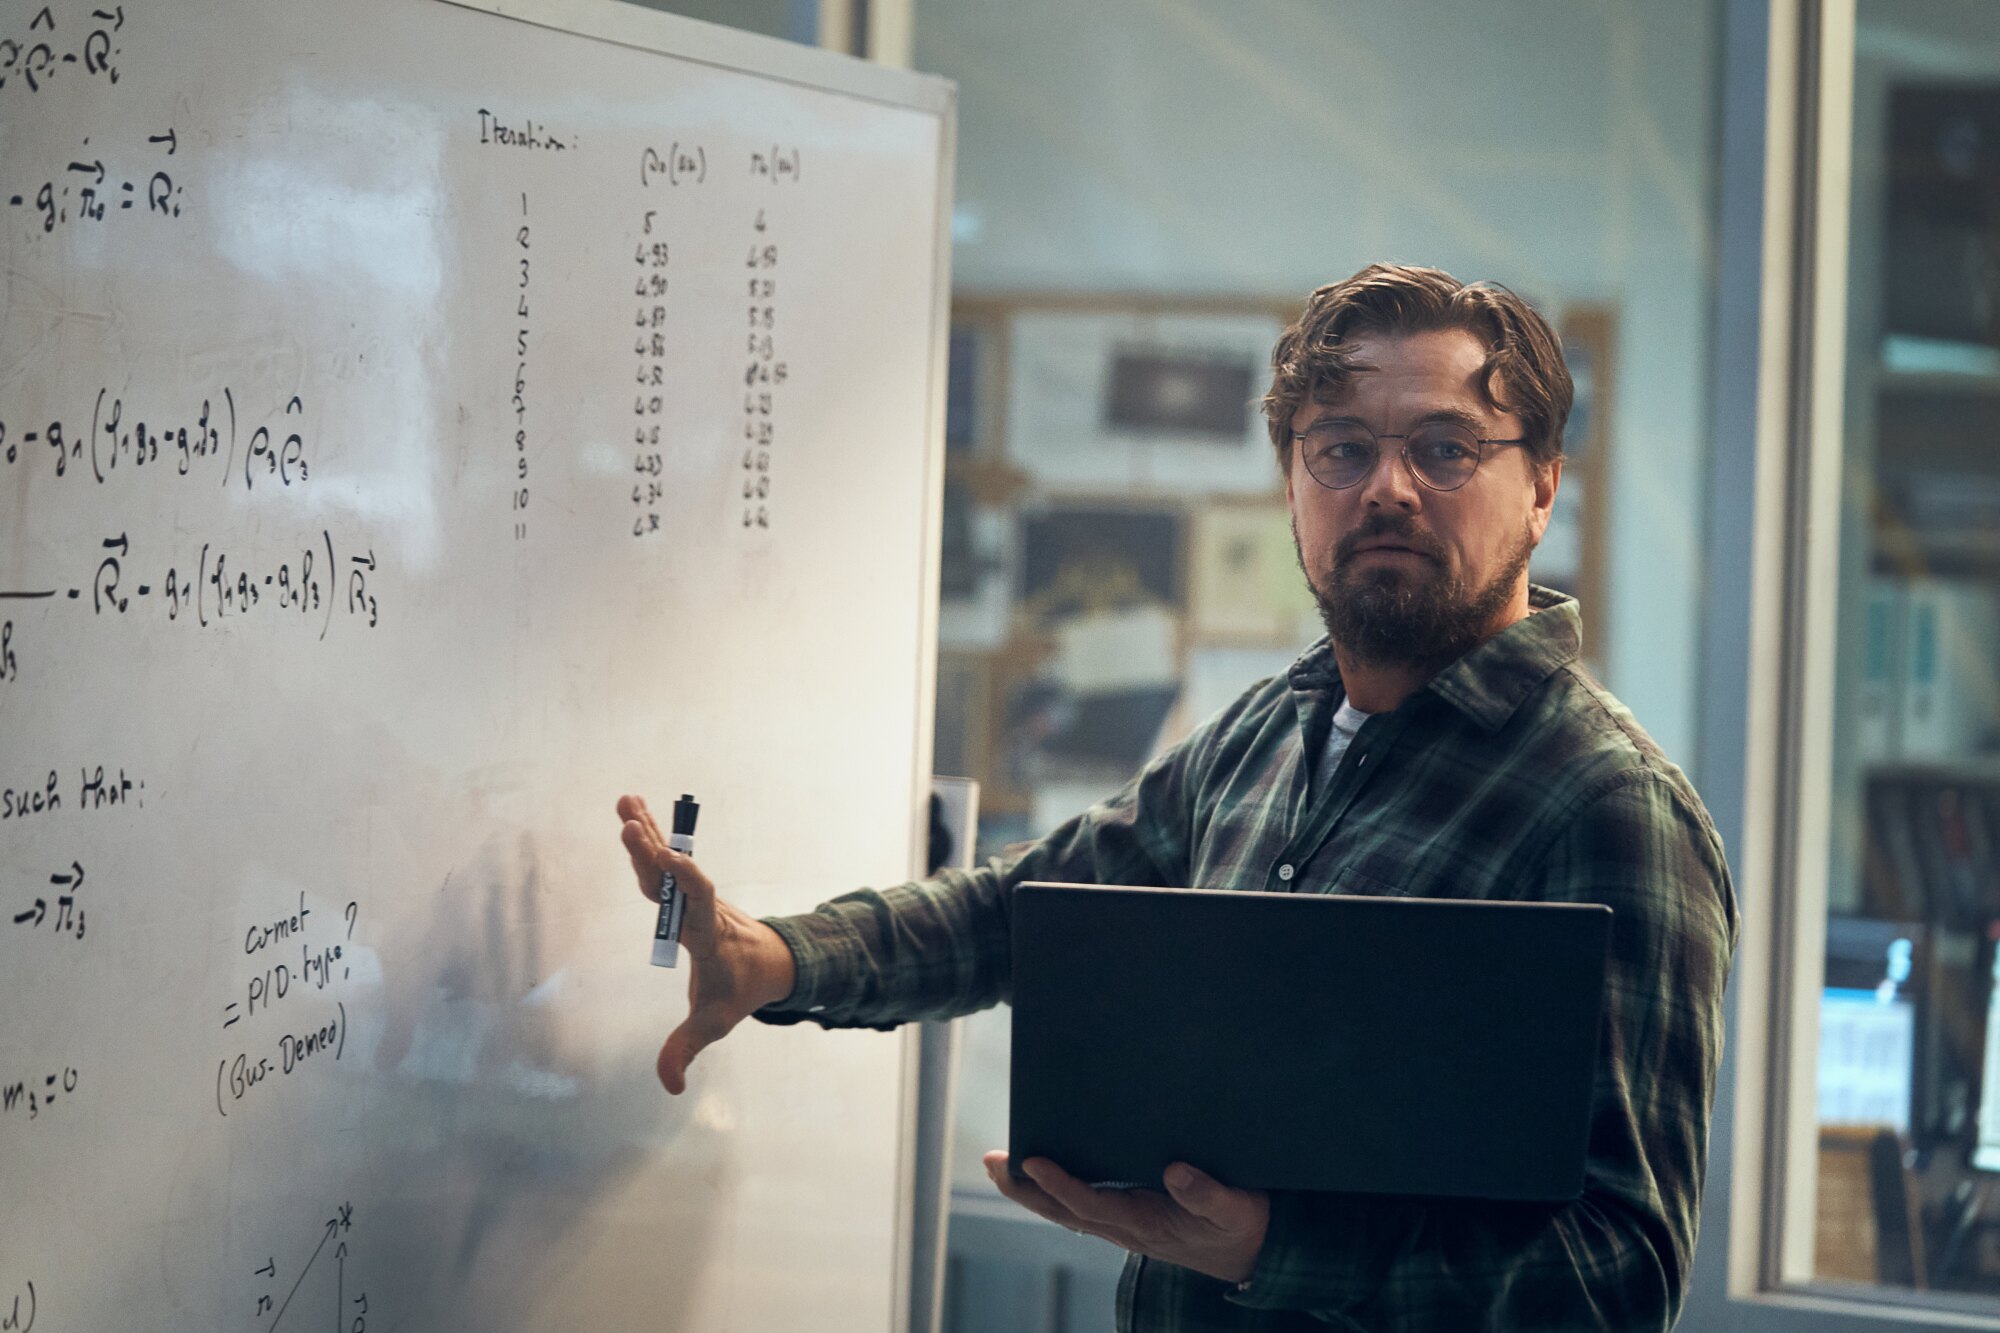 LEONARDO DICAPRIO as DR. RANDALL MINDY, holding a laptop in front of a whiteboard.